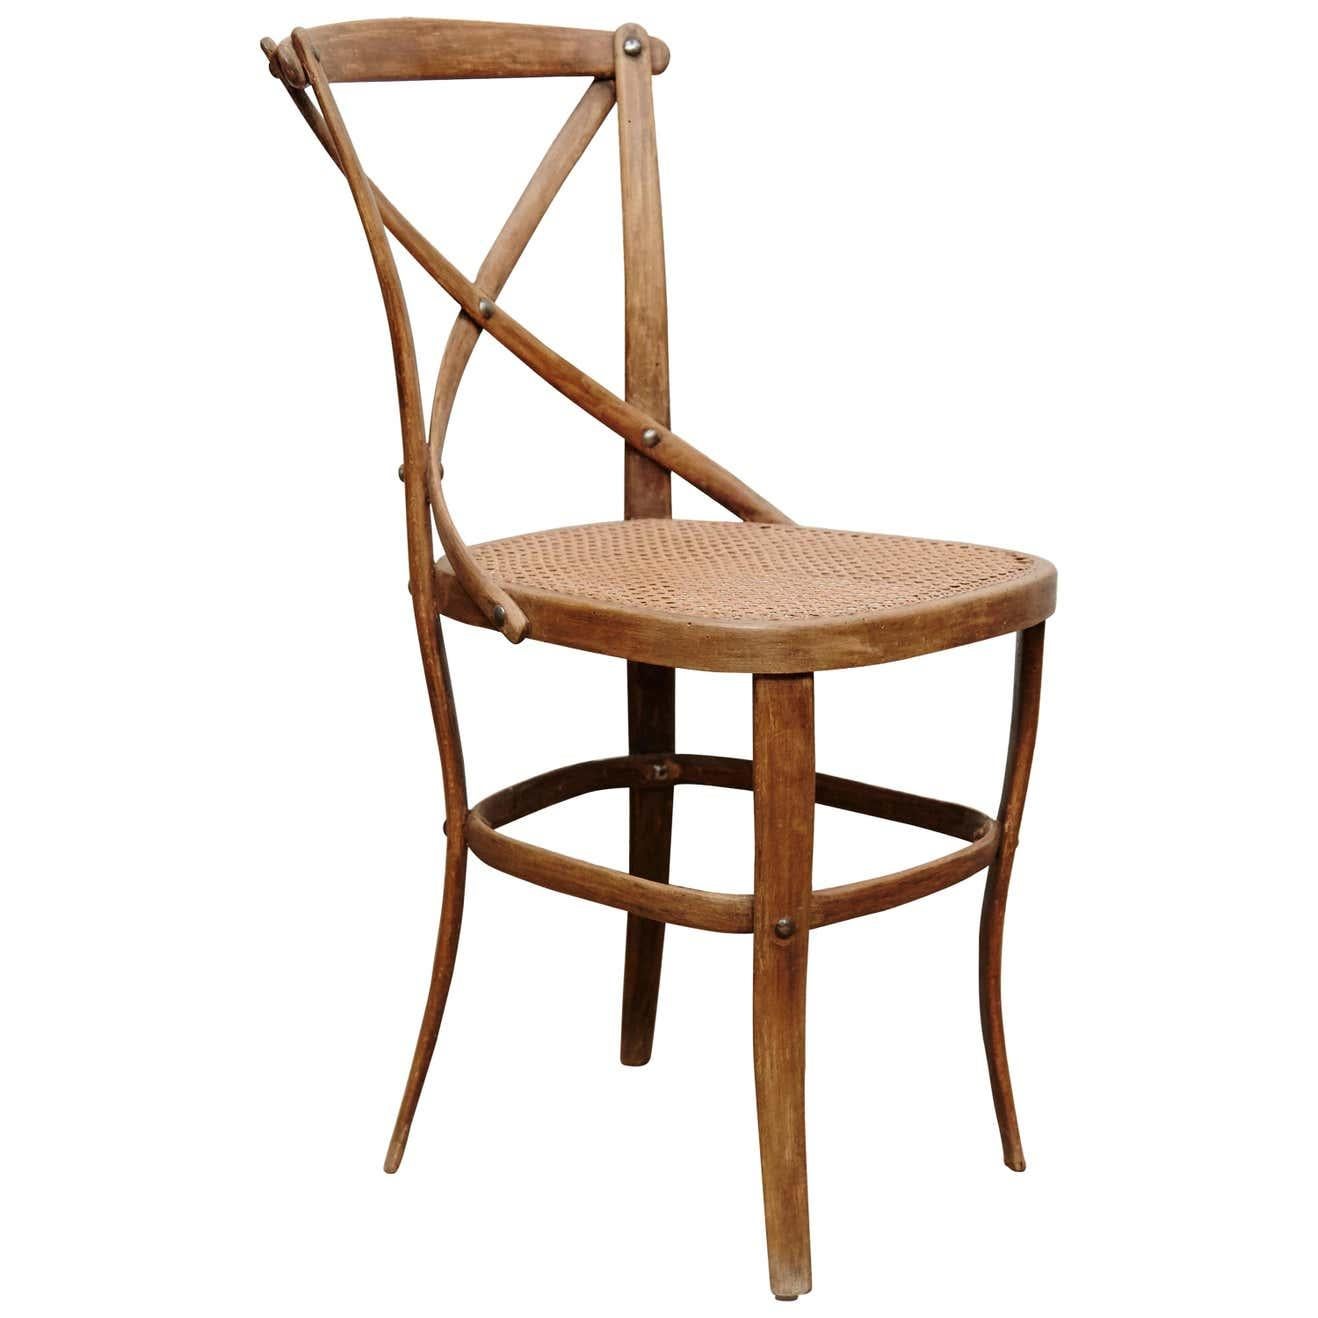 Thonet Wood and Rattan Chair Number 91 by August Thonet, circa 1920 5